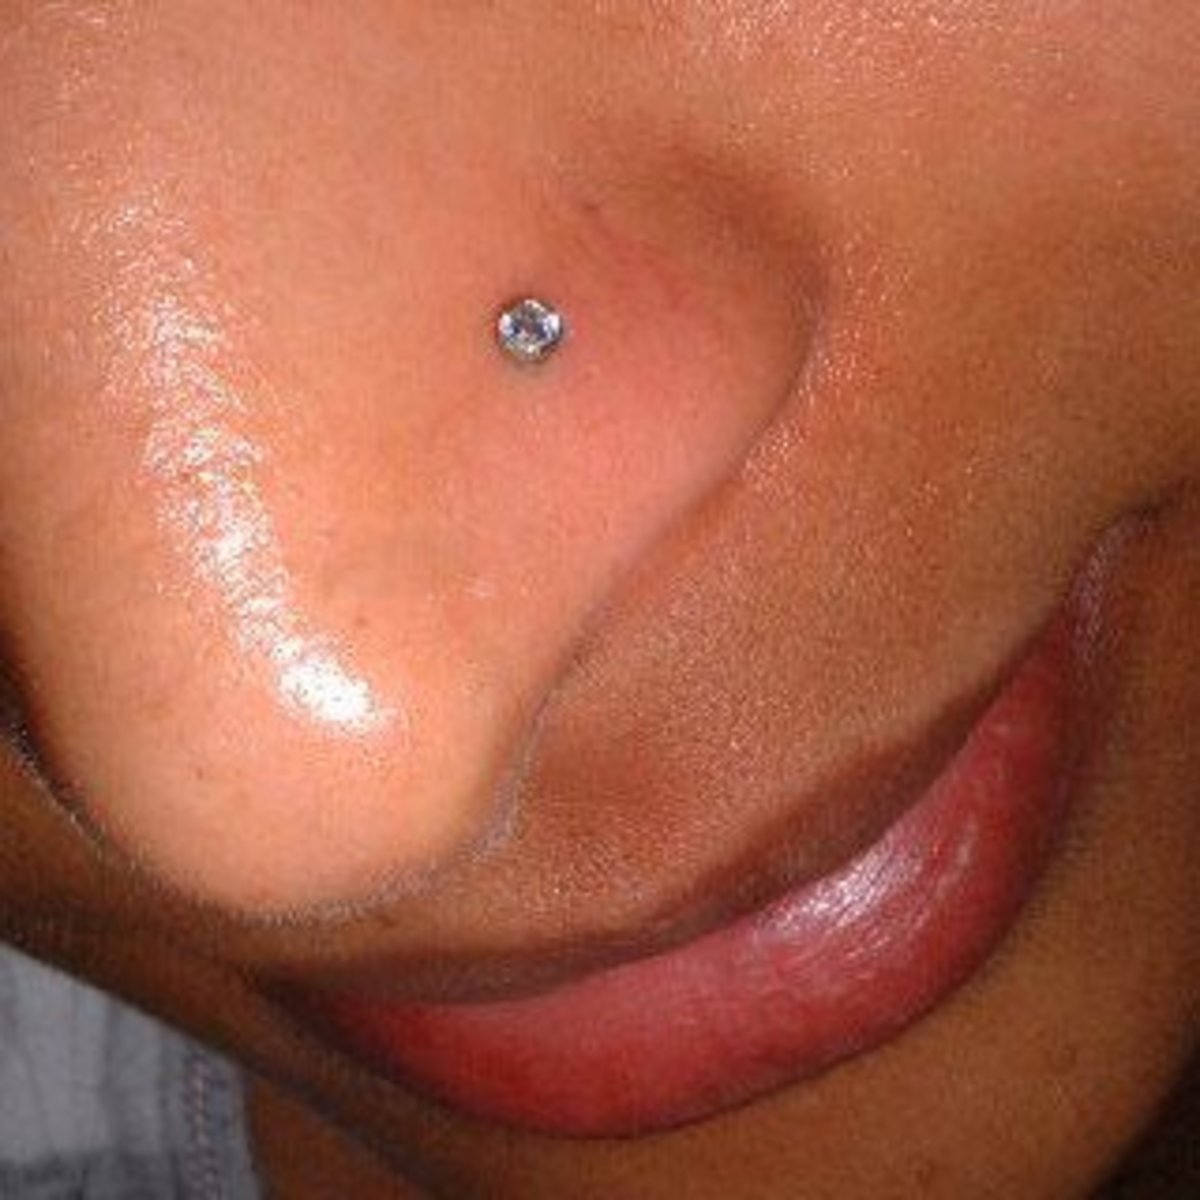 A simple stud worn in the nostril is one of the most common types of jewelry.